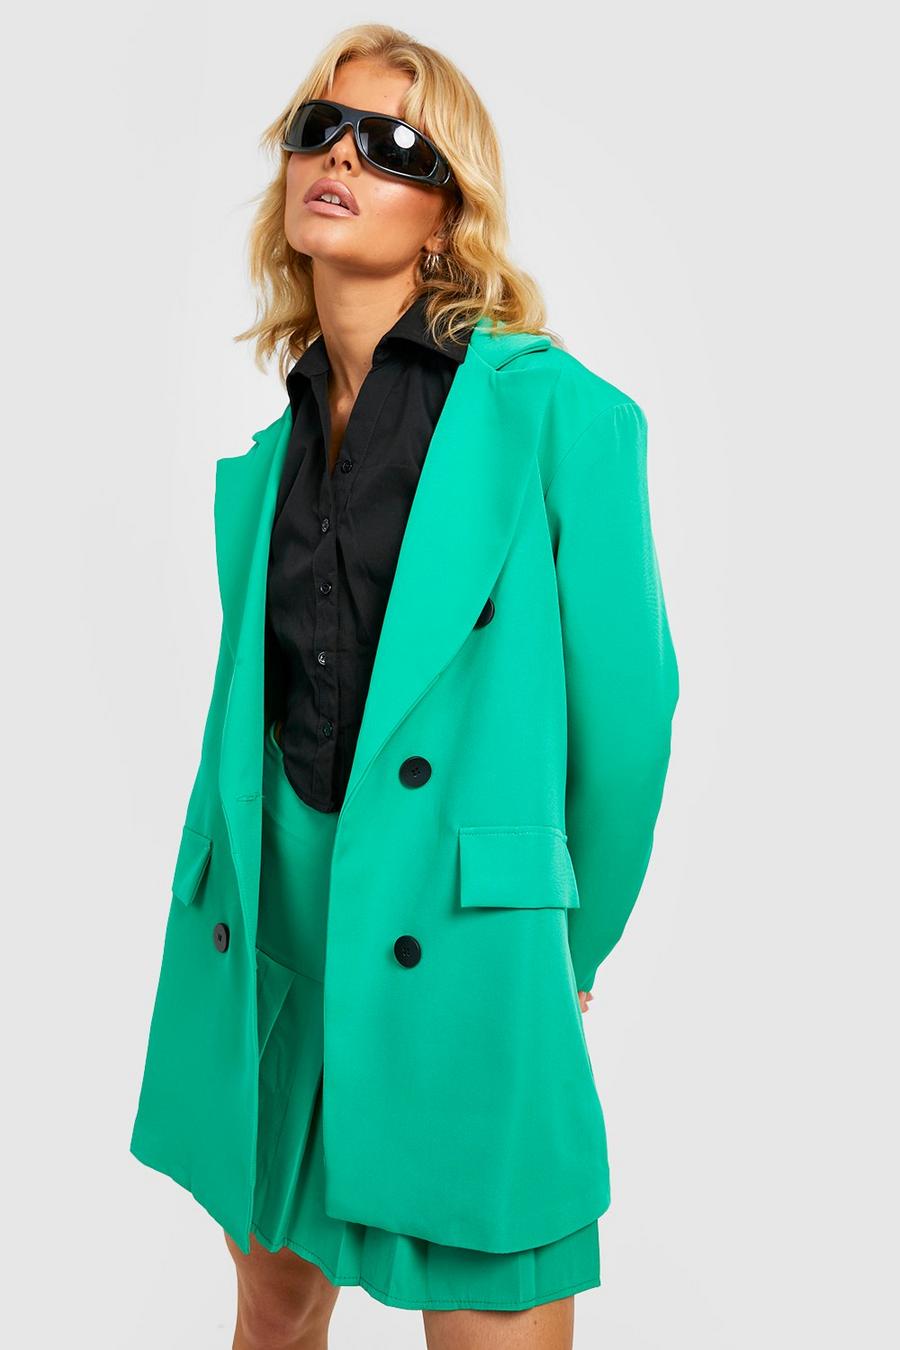 Bright green Double Breasted Contrast Button Blazer